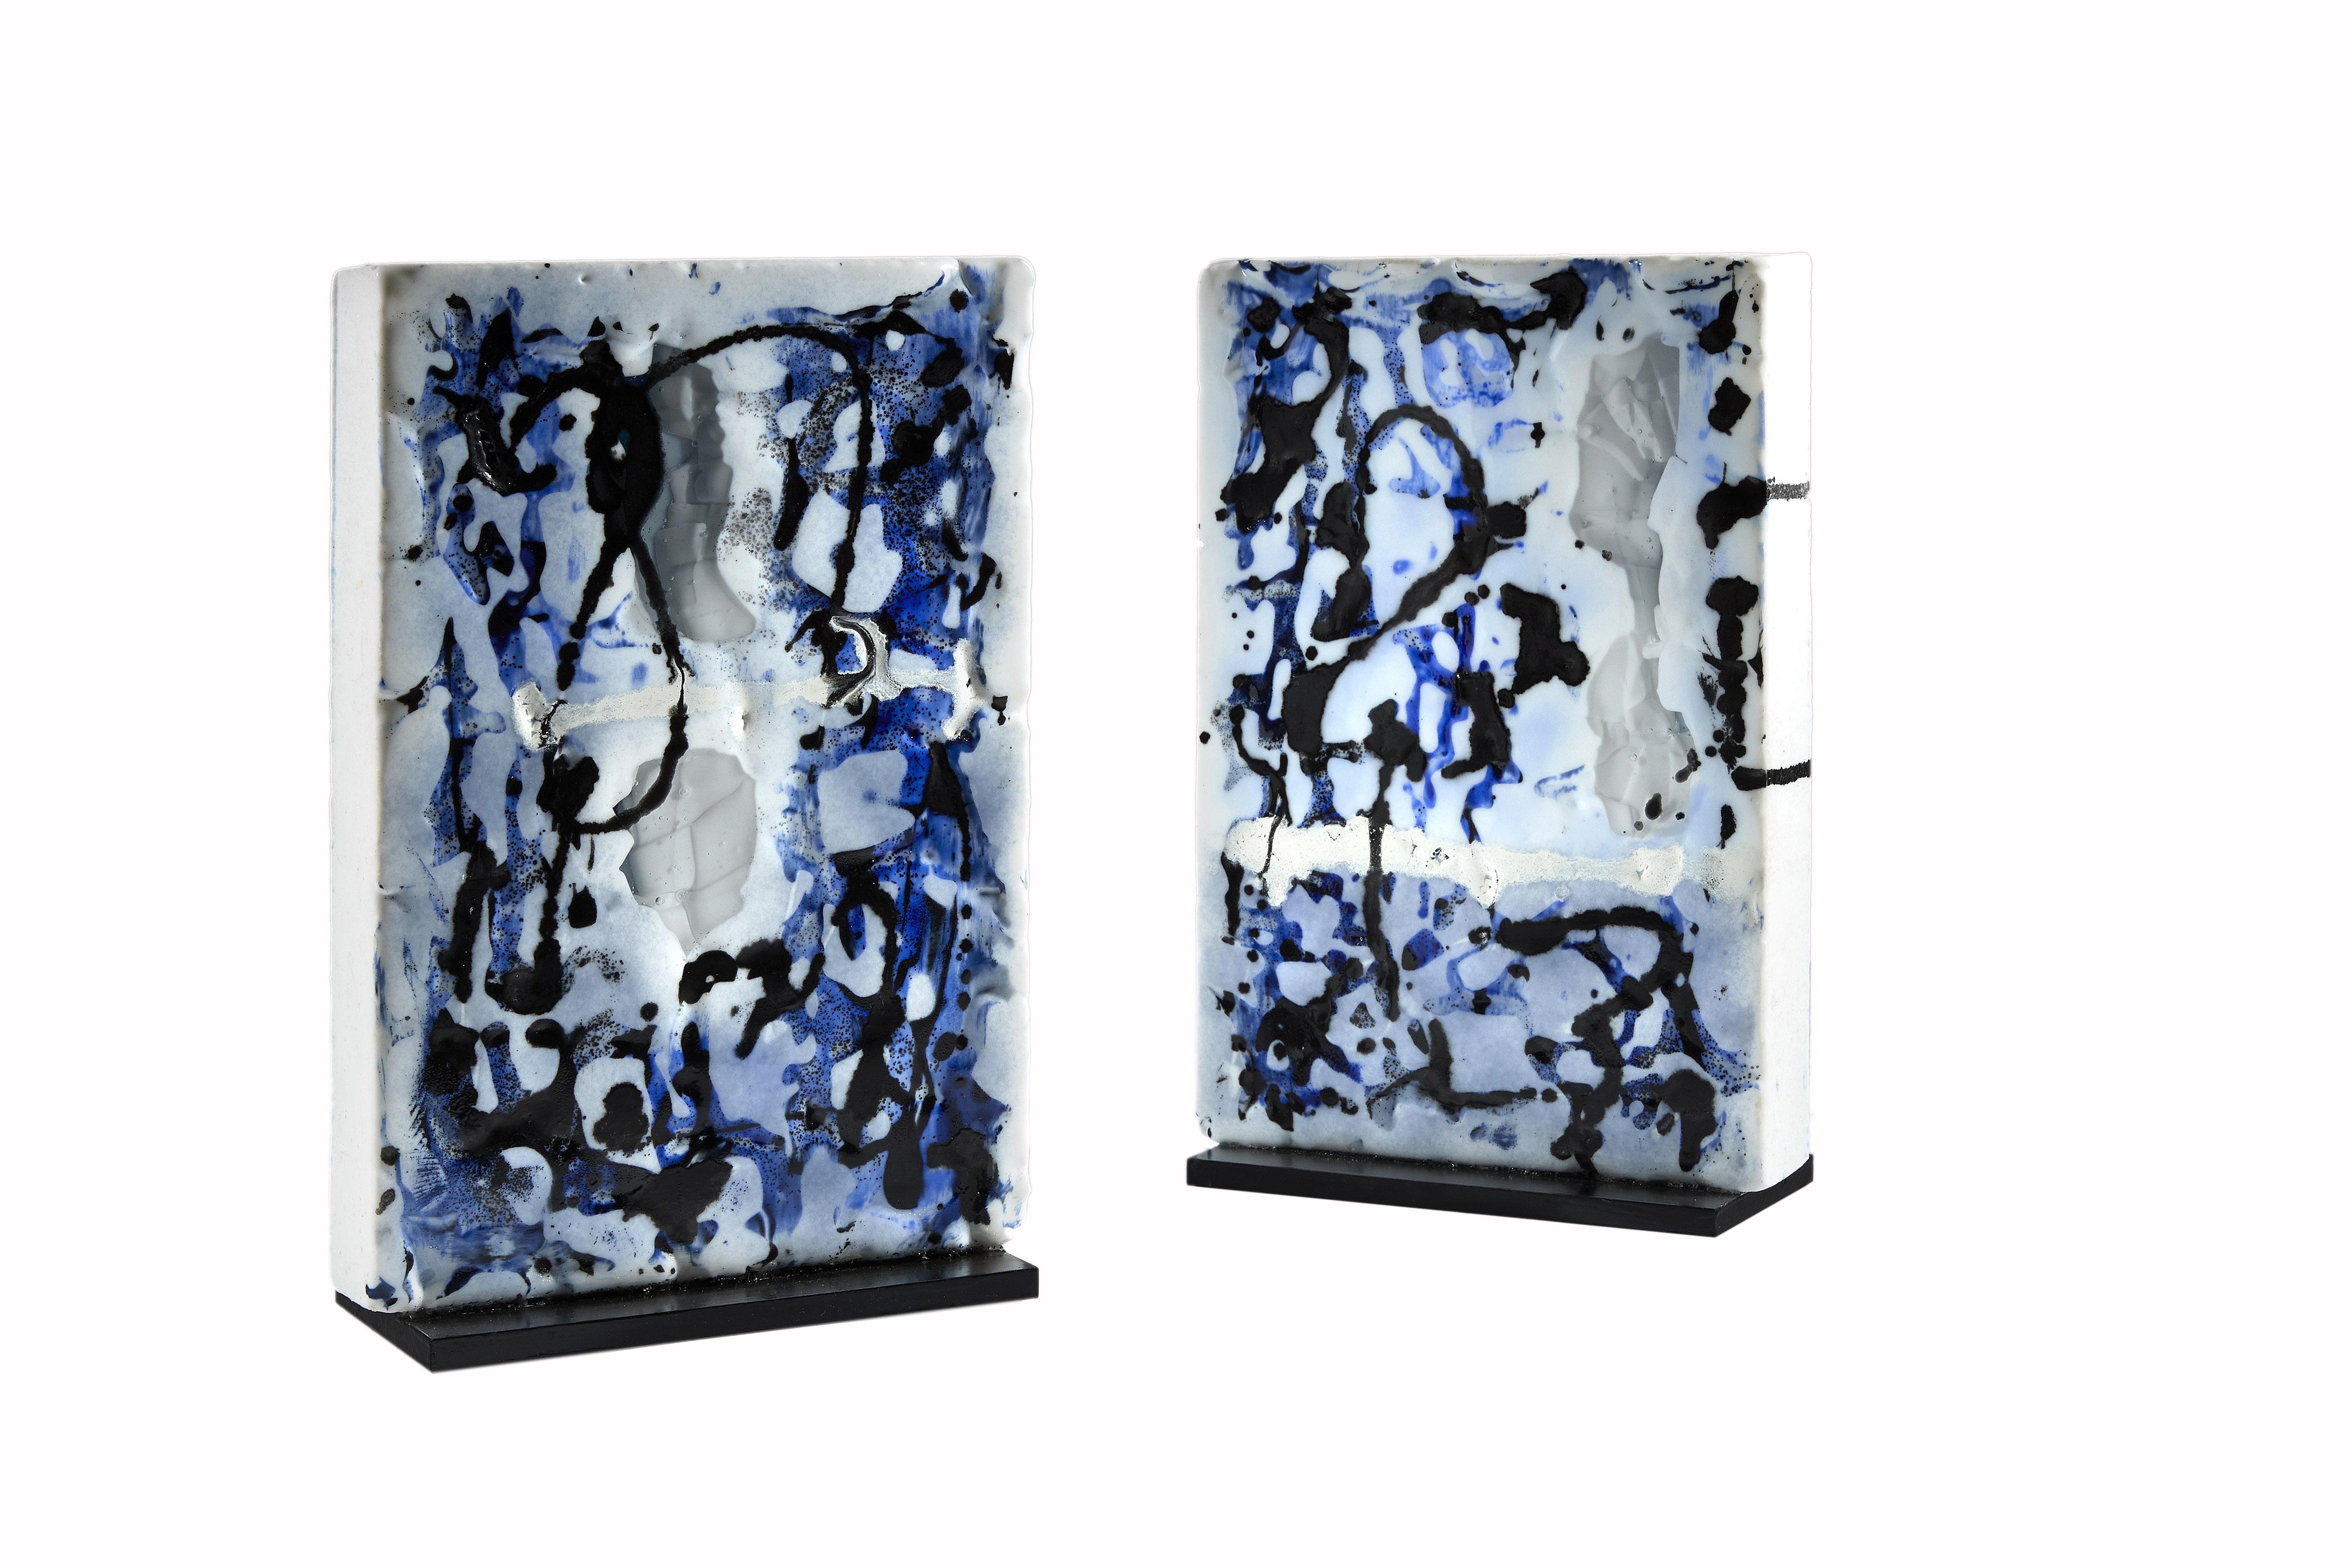 Les Mots Bleus by Perrin & Perrin, Galerie Negropontes in Paris, France. Duo Glass Sculpture, Build-in-Glass, One of a Kind 

Martine and Jacki Perrin sculpt together as one, forming a duo enriched by their individualities. For over a decade they